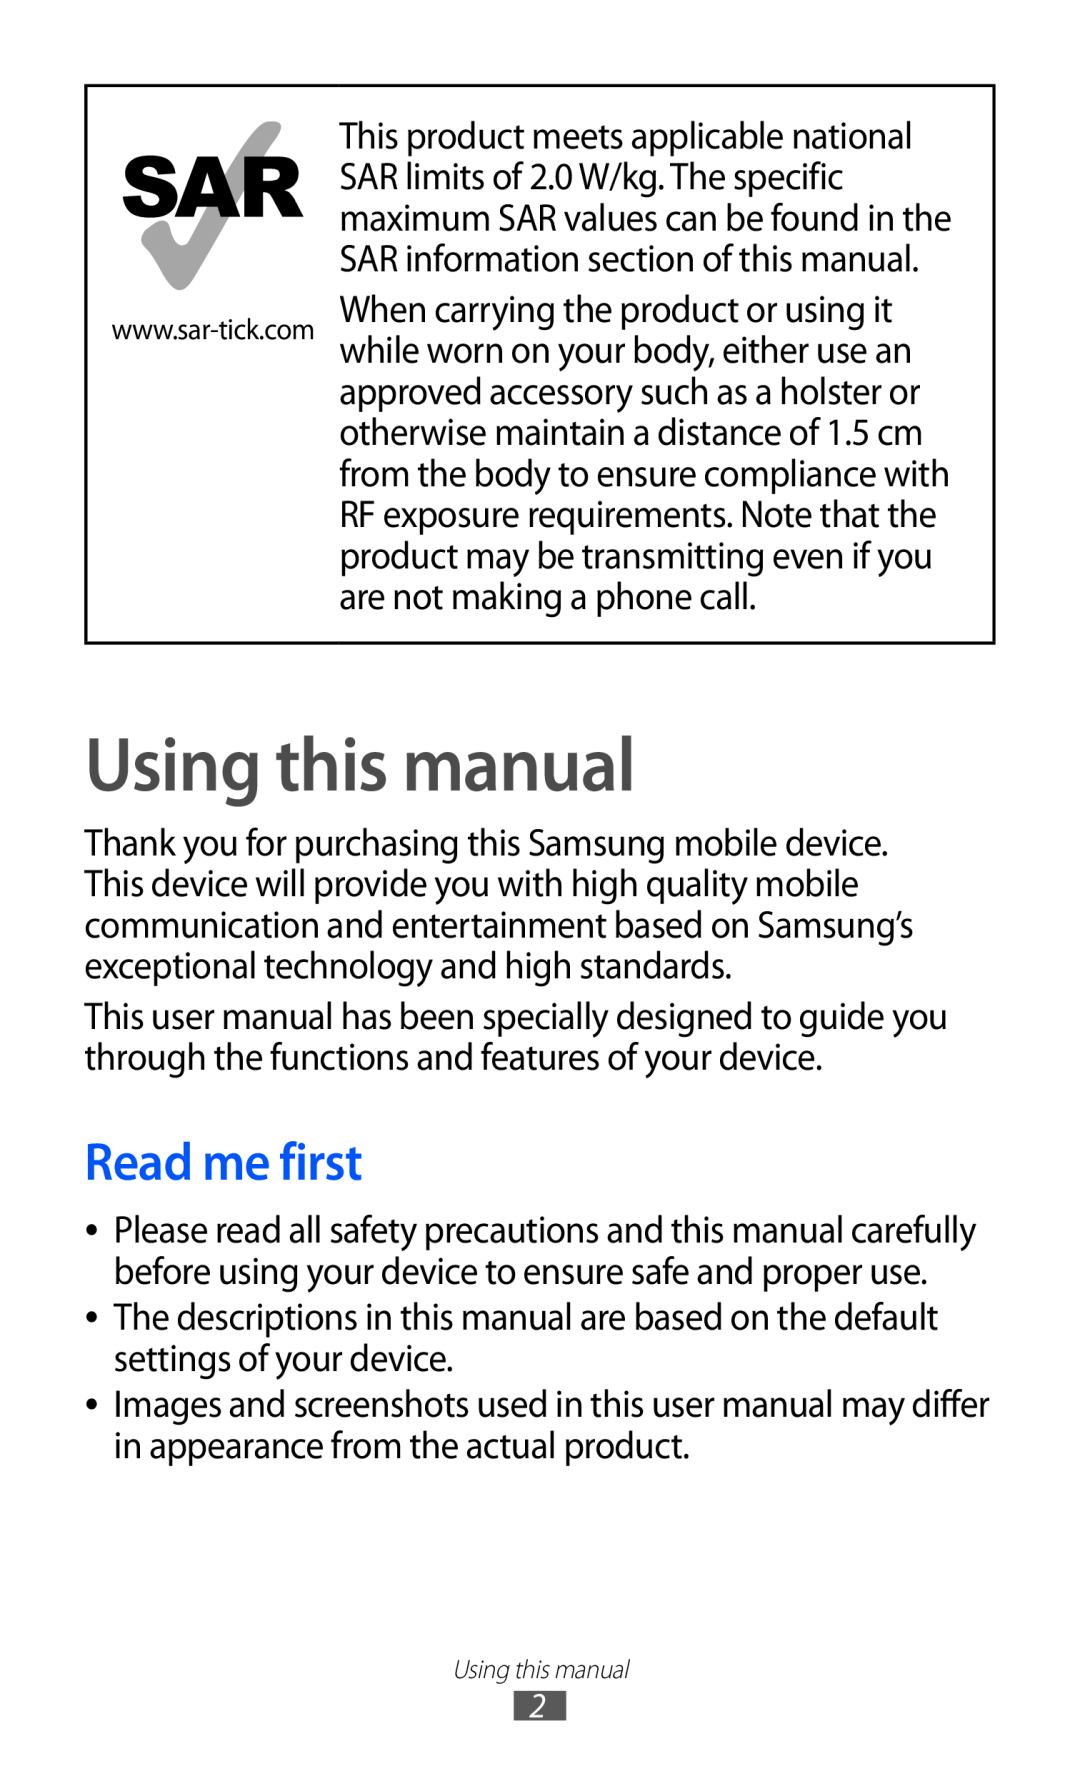 Samsung GT-I9070 user manual Using this manual, Read me first 